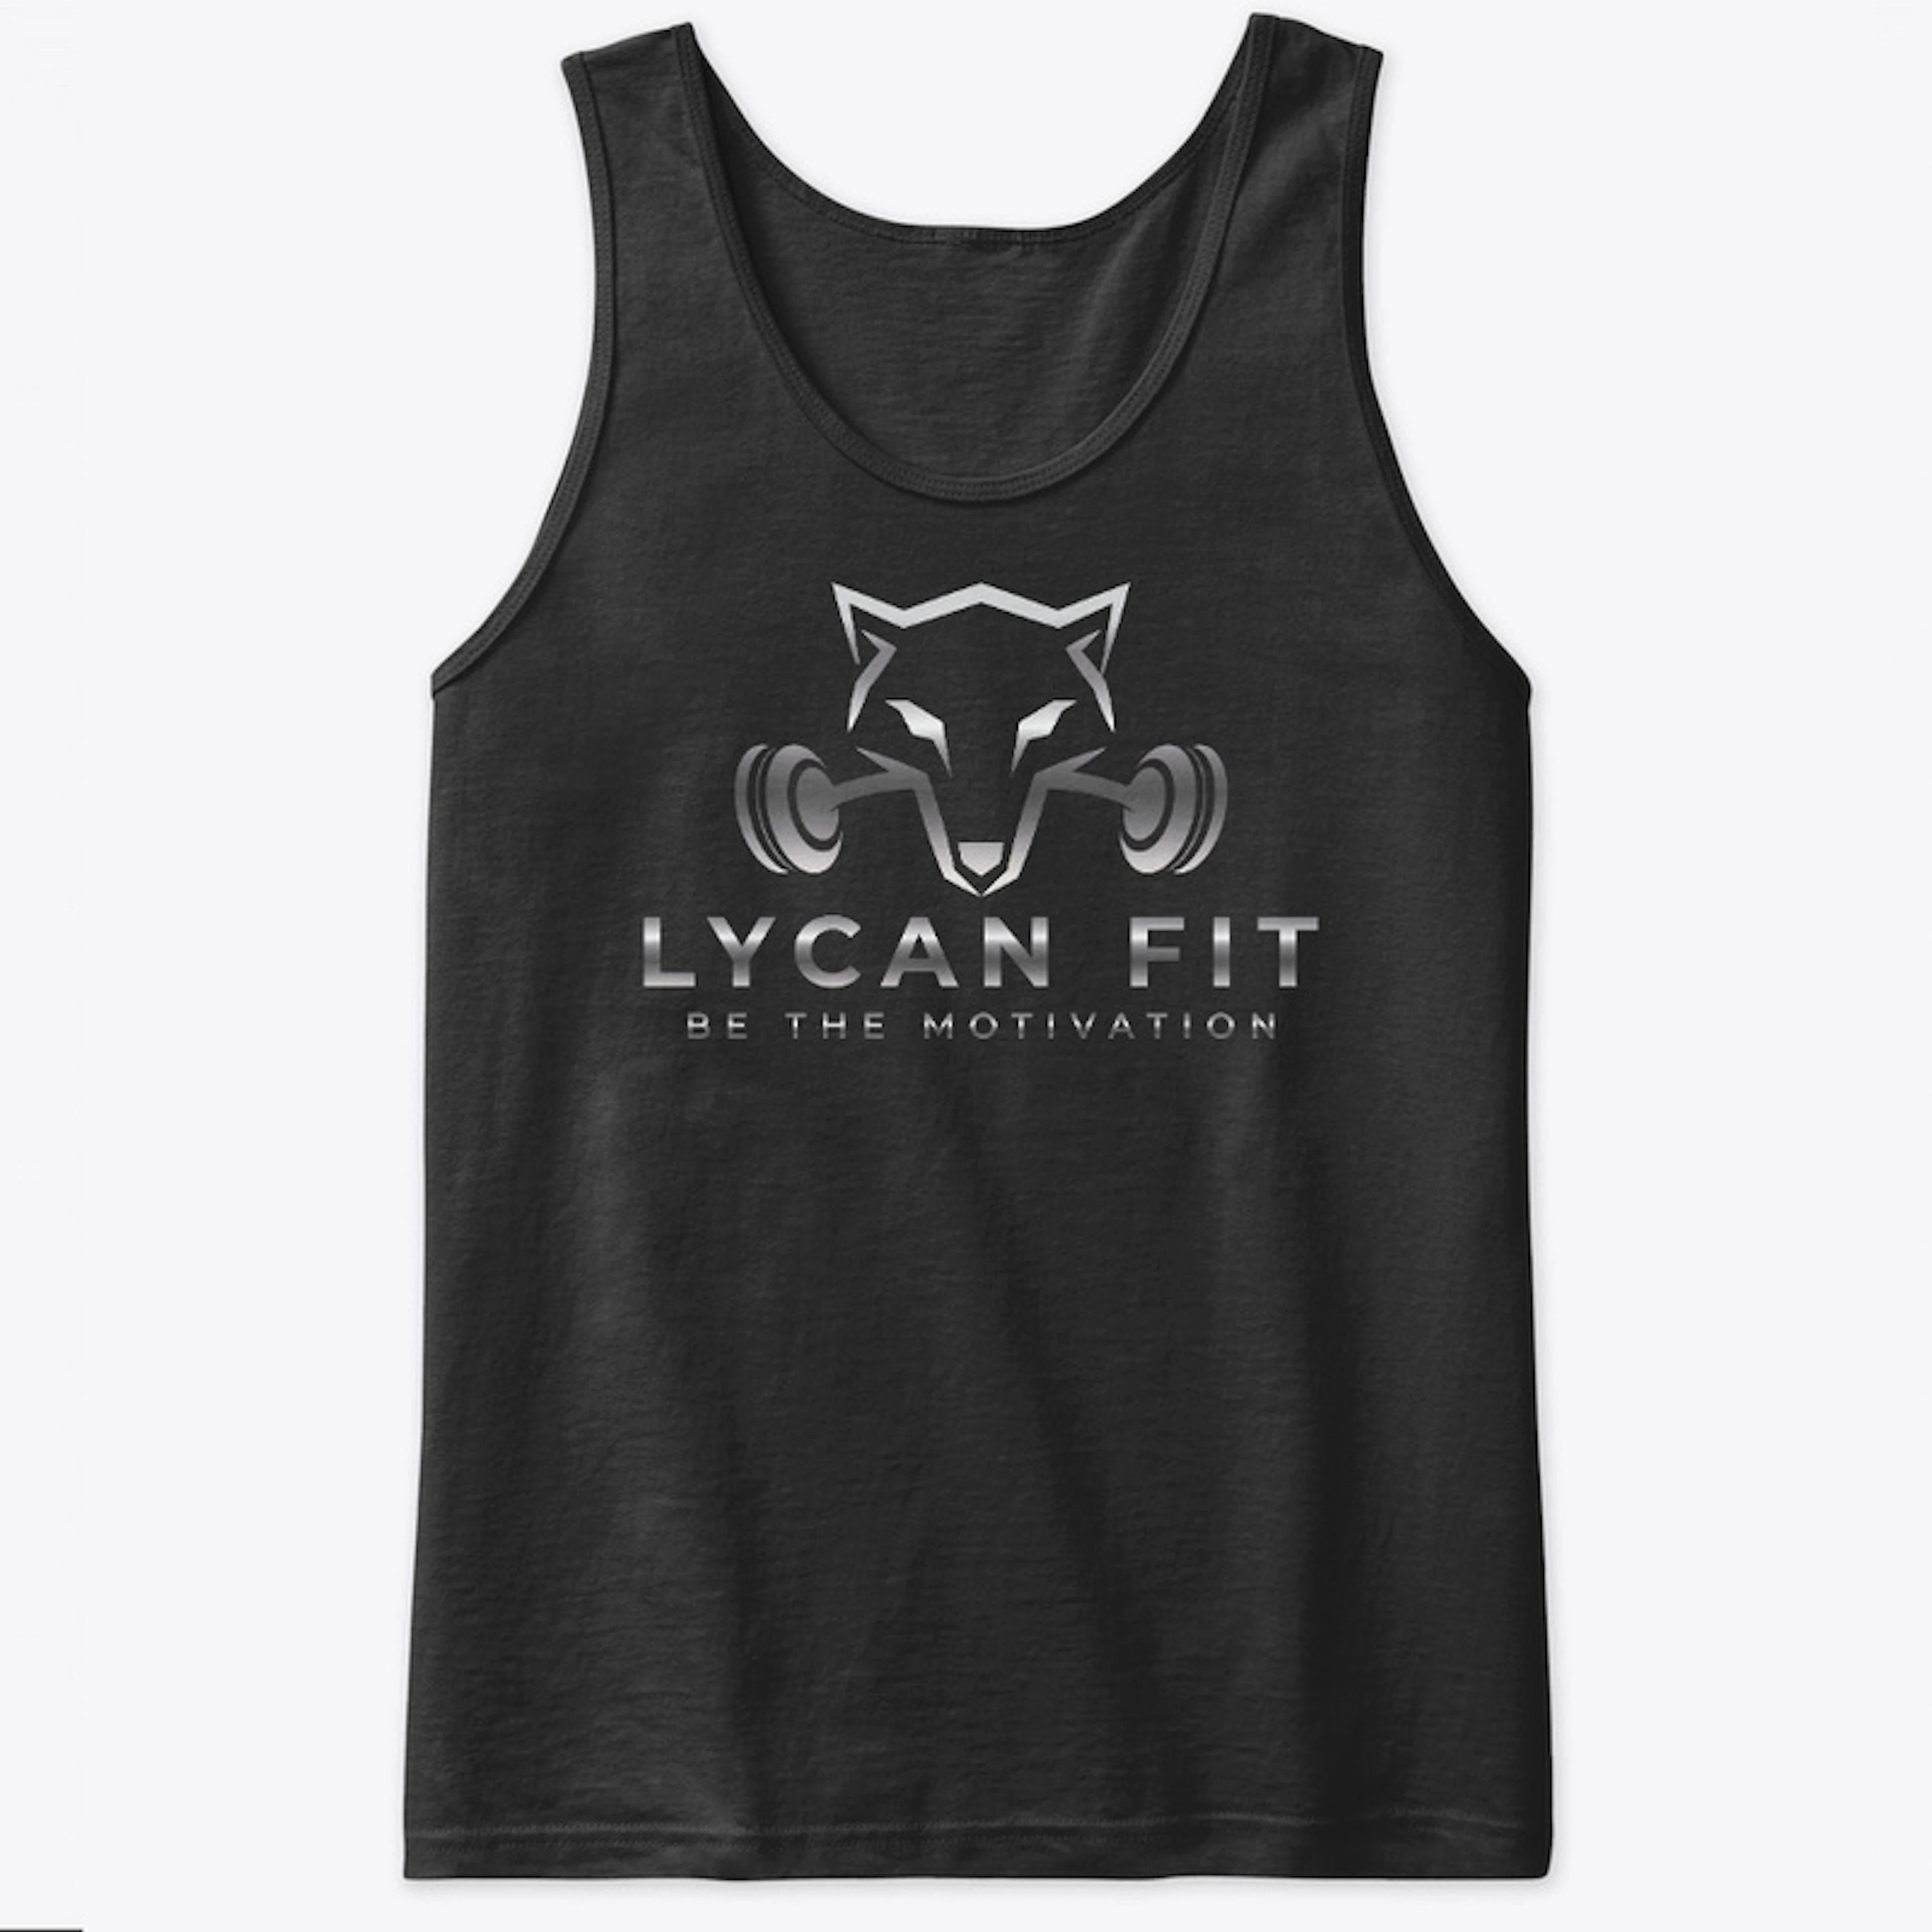 Lycan Fit active wear and acessories